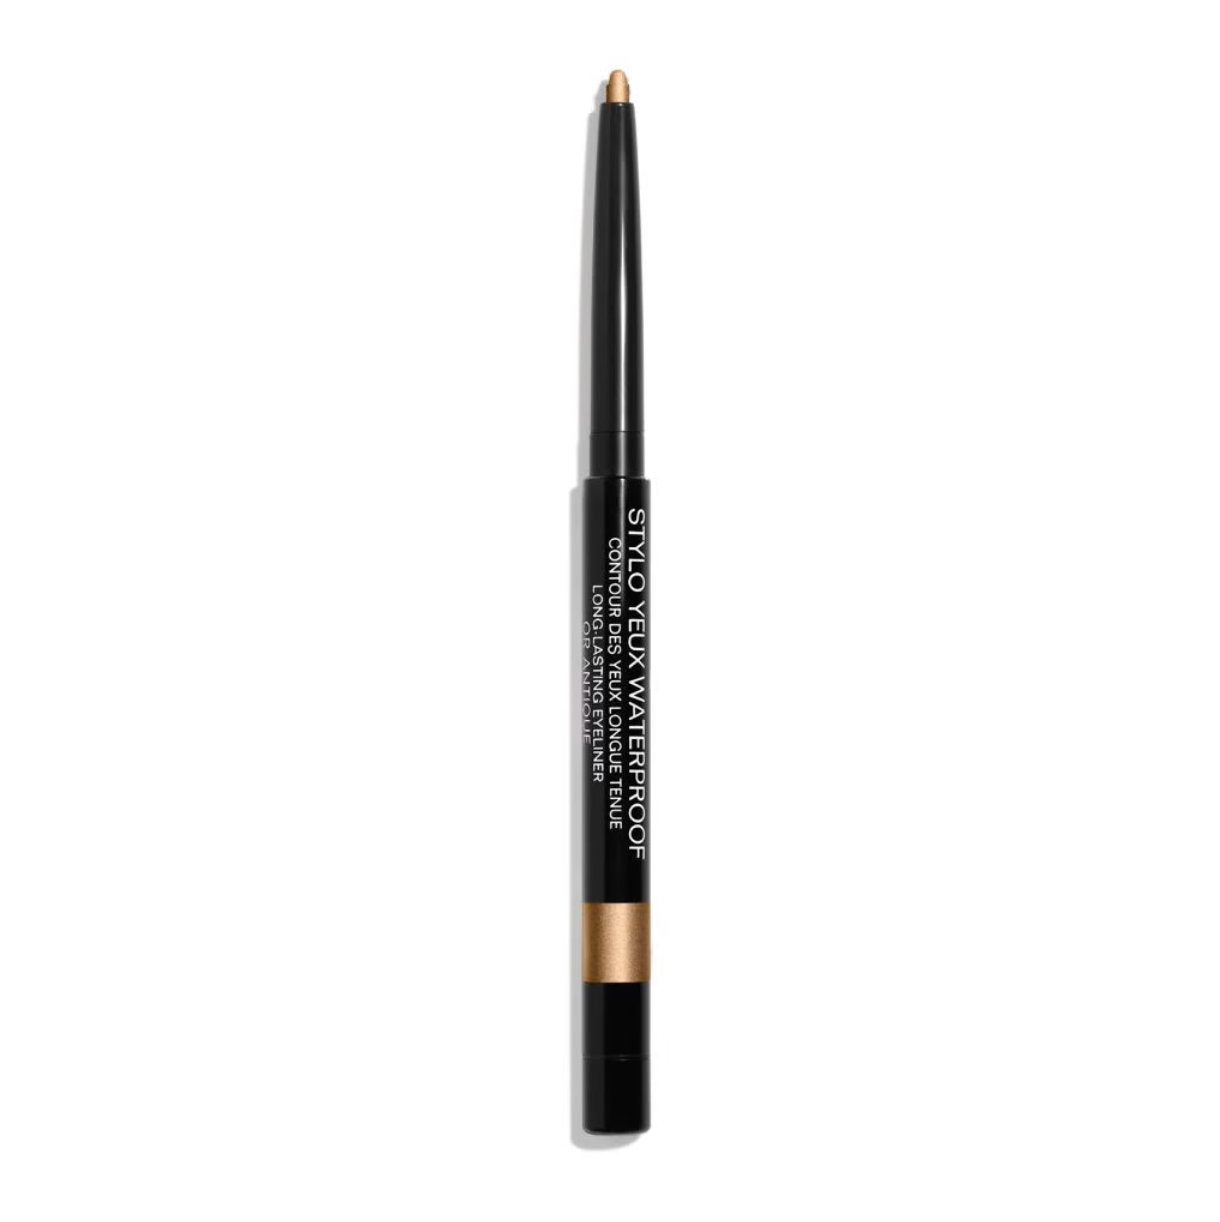 Autumn Beauty Trends: Chanel Stylo Yeux Waterproof Long Lasting Eyeliner in Or Antique